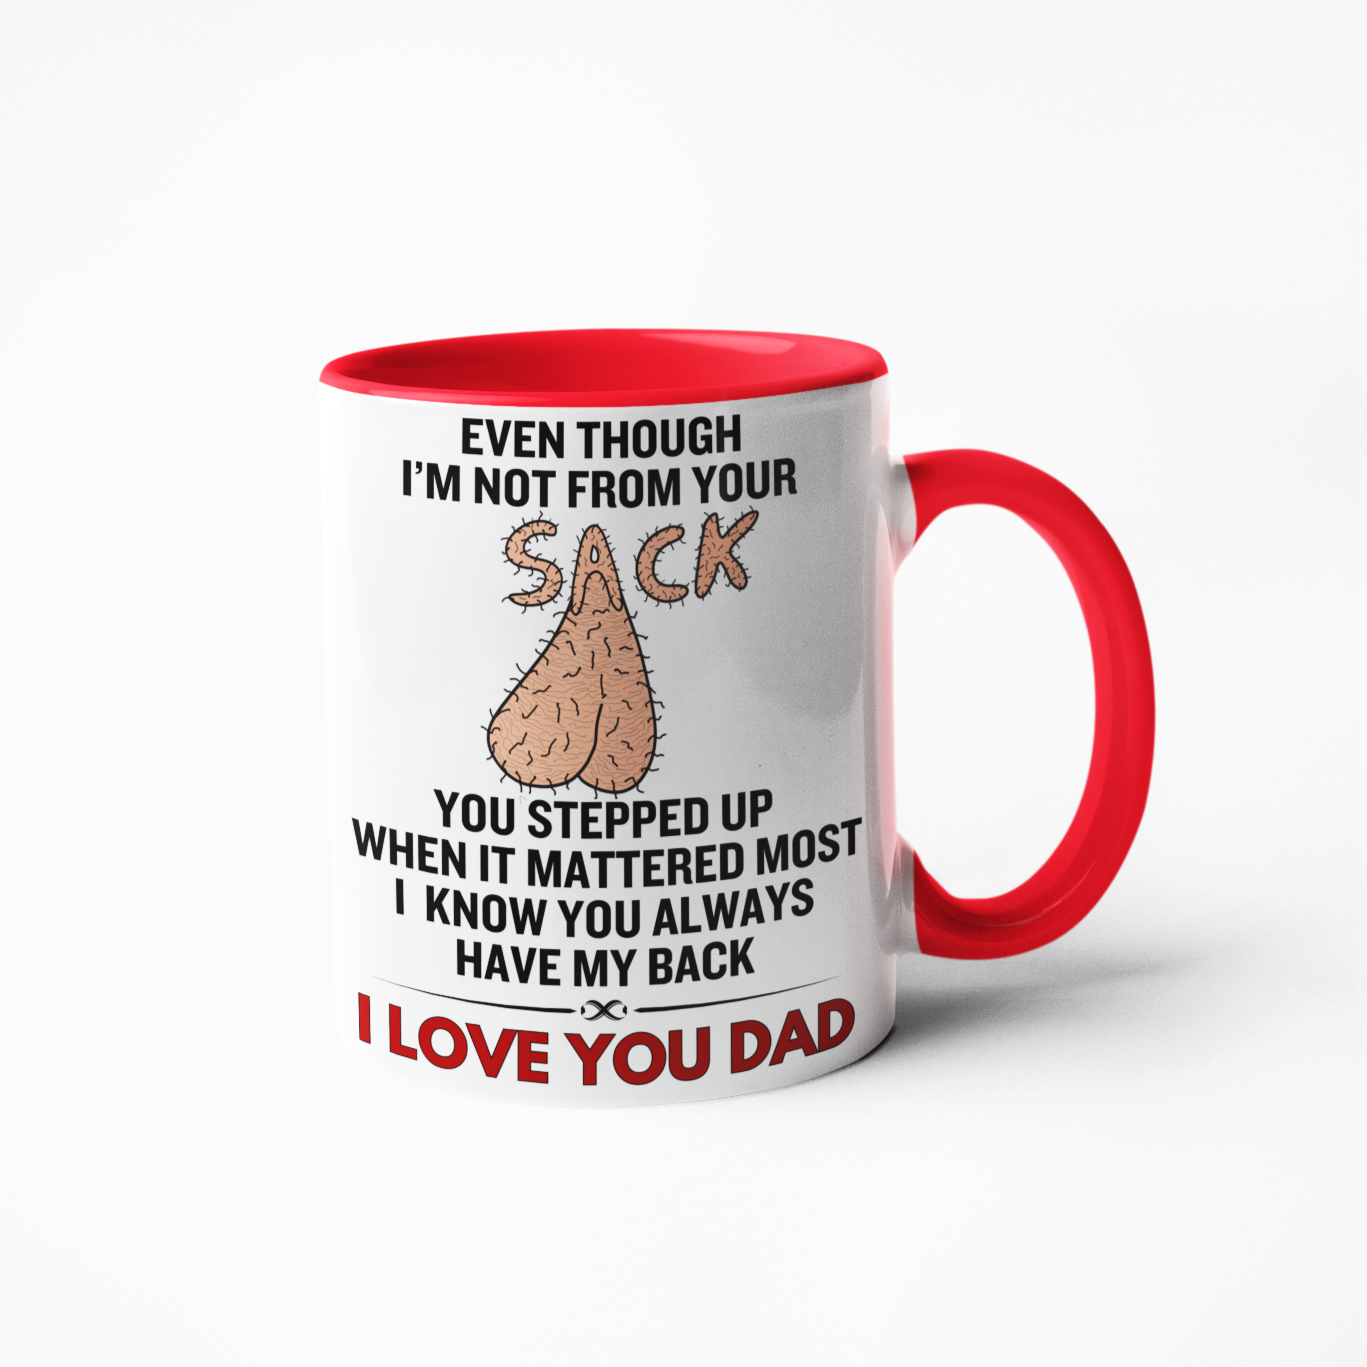 Show your stepdad some appreciation with this fun and unique Step Dad Rude Funny Coffee Mug. It's perfect for a morning cup of coffee or tea, making it a great gift for any occasion. Enjoy the perfect brew in a stylish, humorous mug!